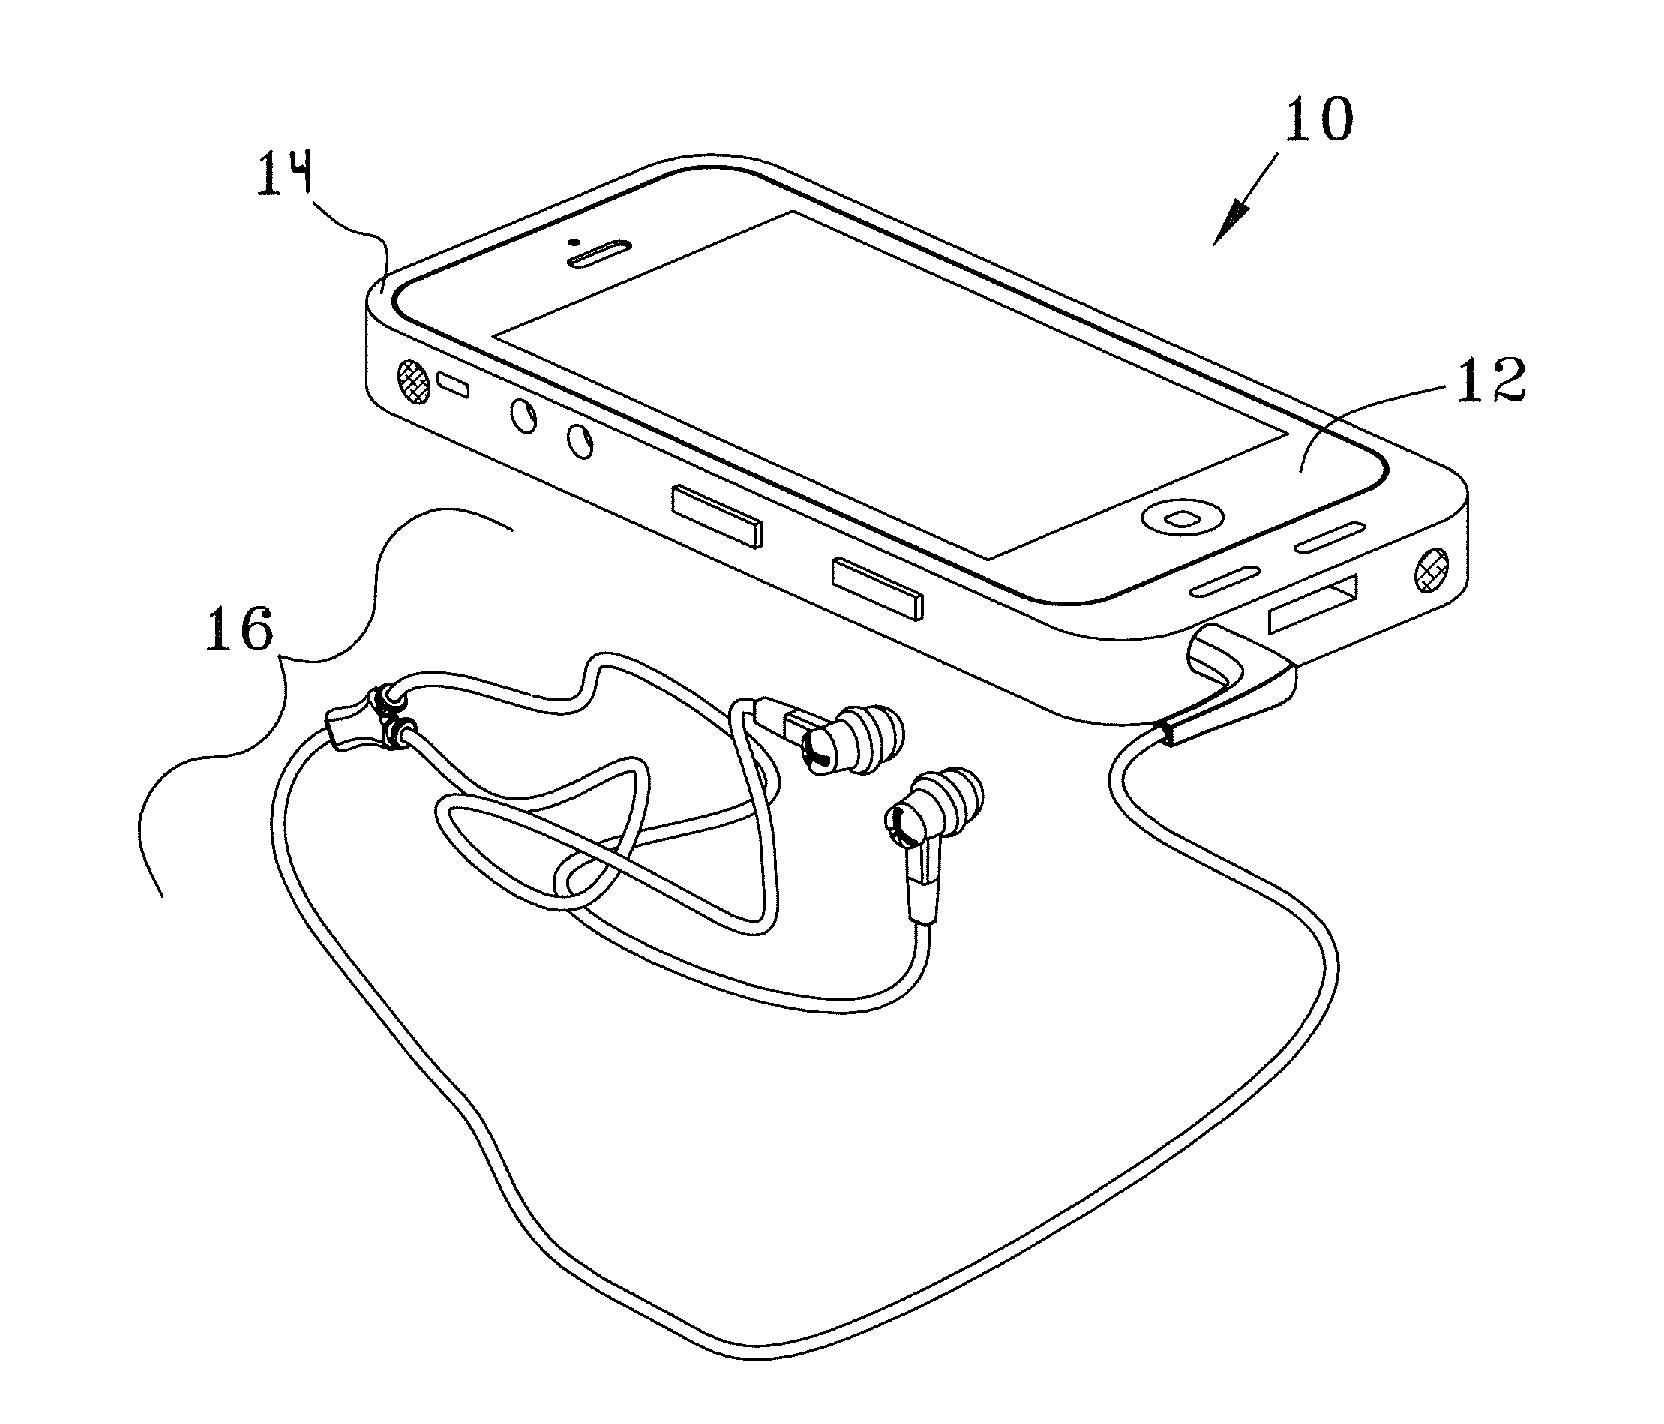 Portable binaural recording and playback accessory for a multimedia device